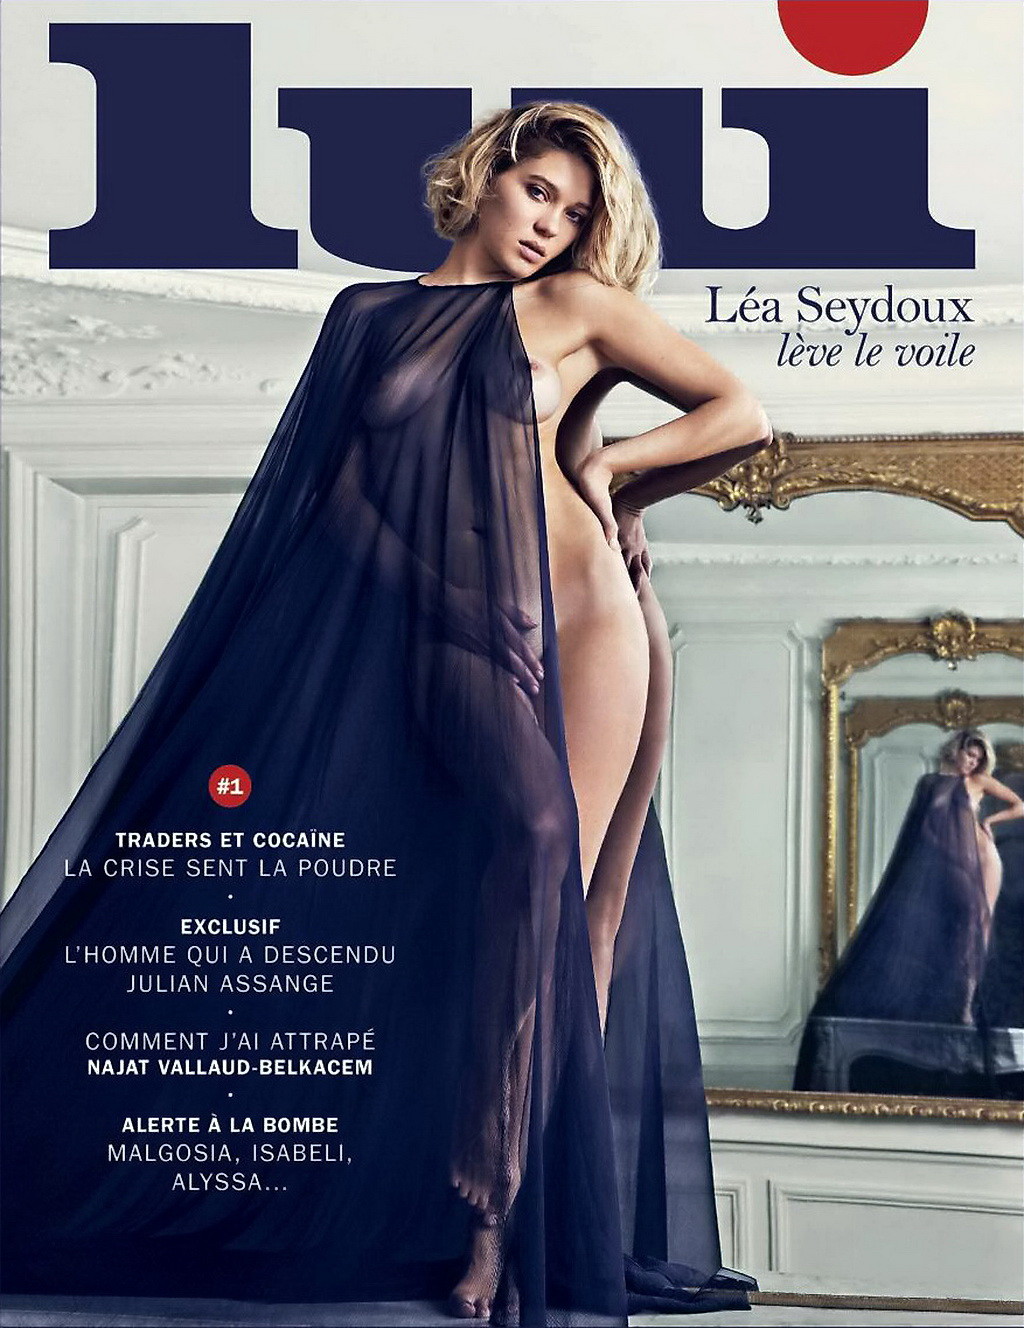 Lea Seydoux nude photoshoot by Mario Sorrenti for the premiere issue of LUI Maga #75217320